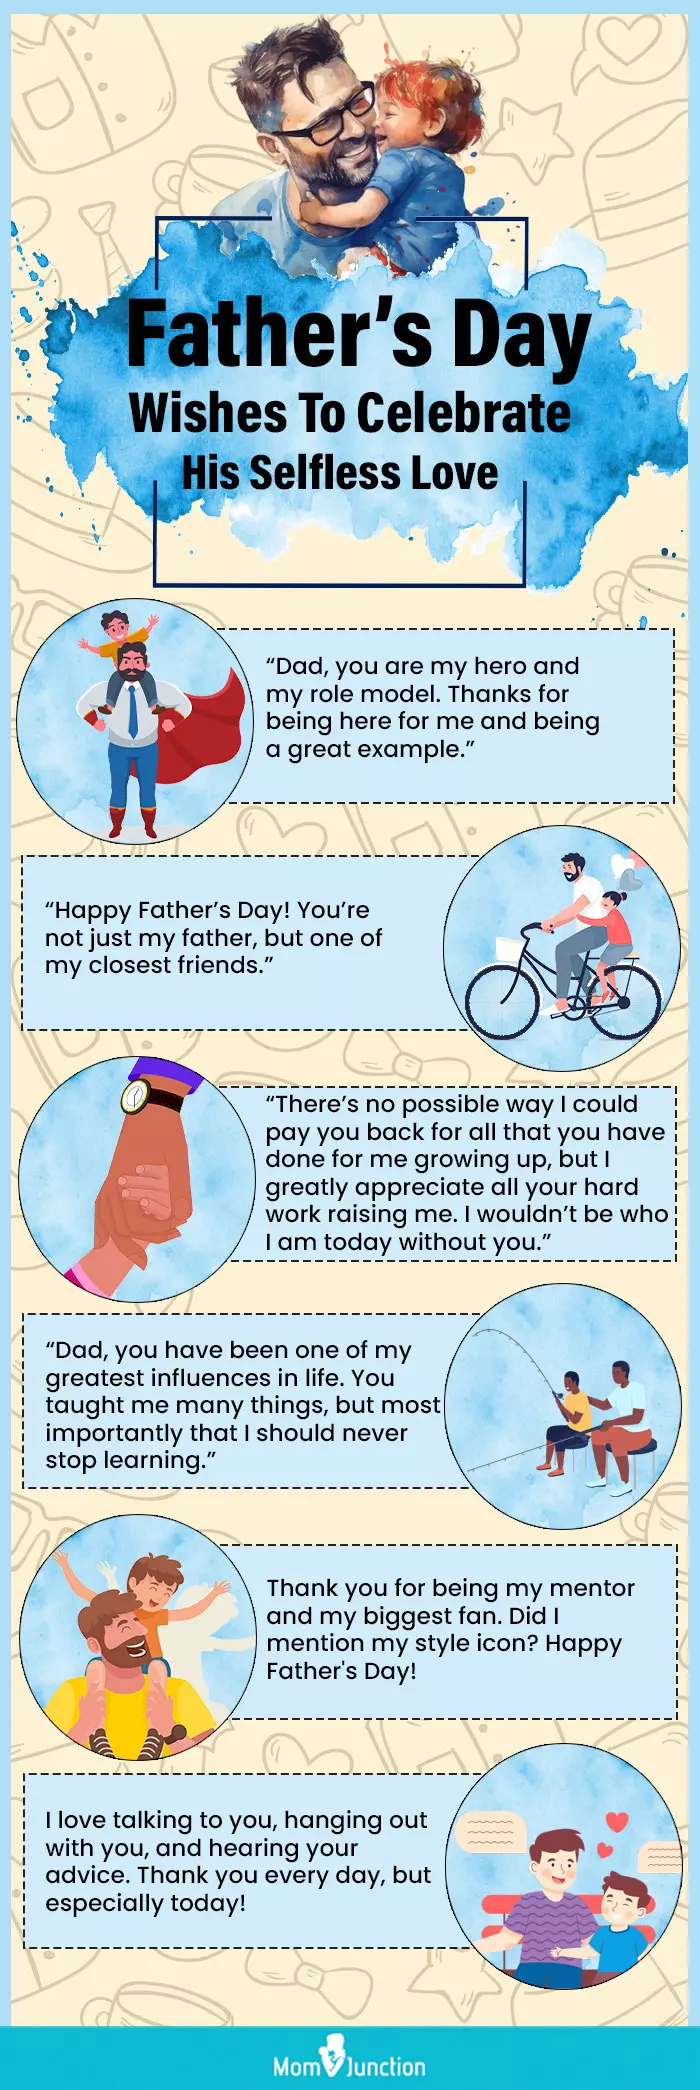 fathers day wishes to celebrate his selfless love (infographic)